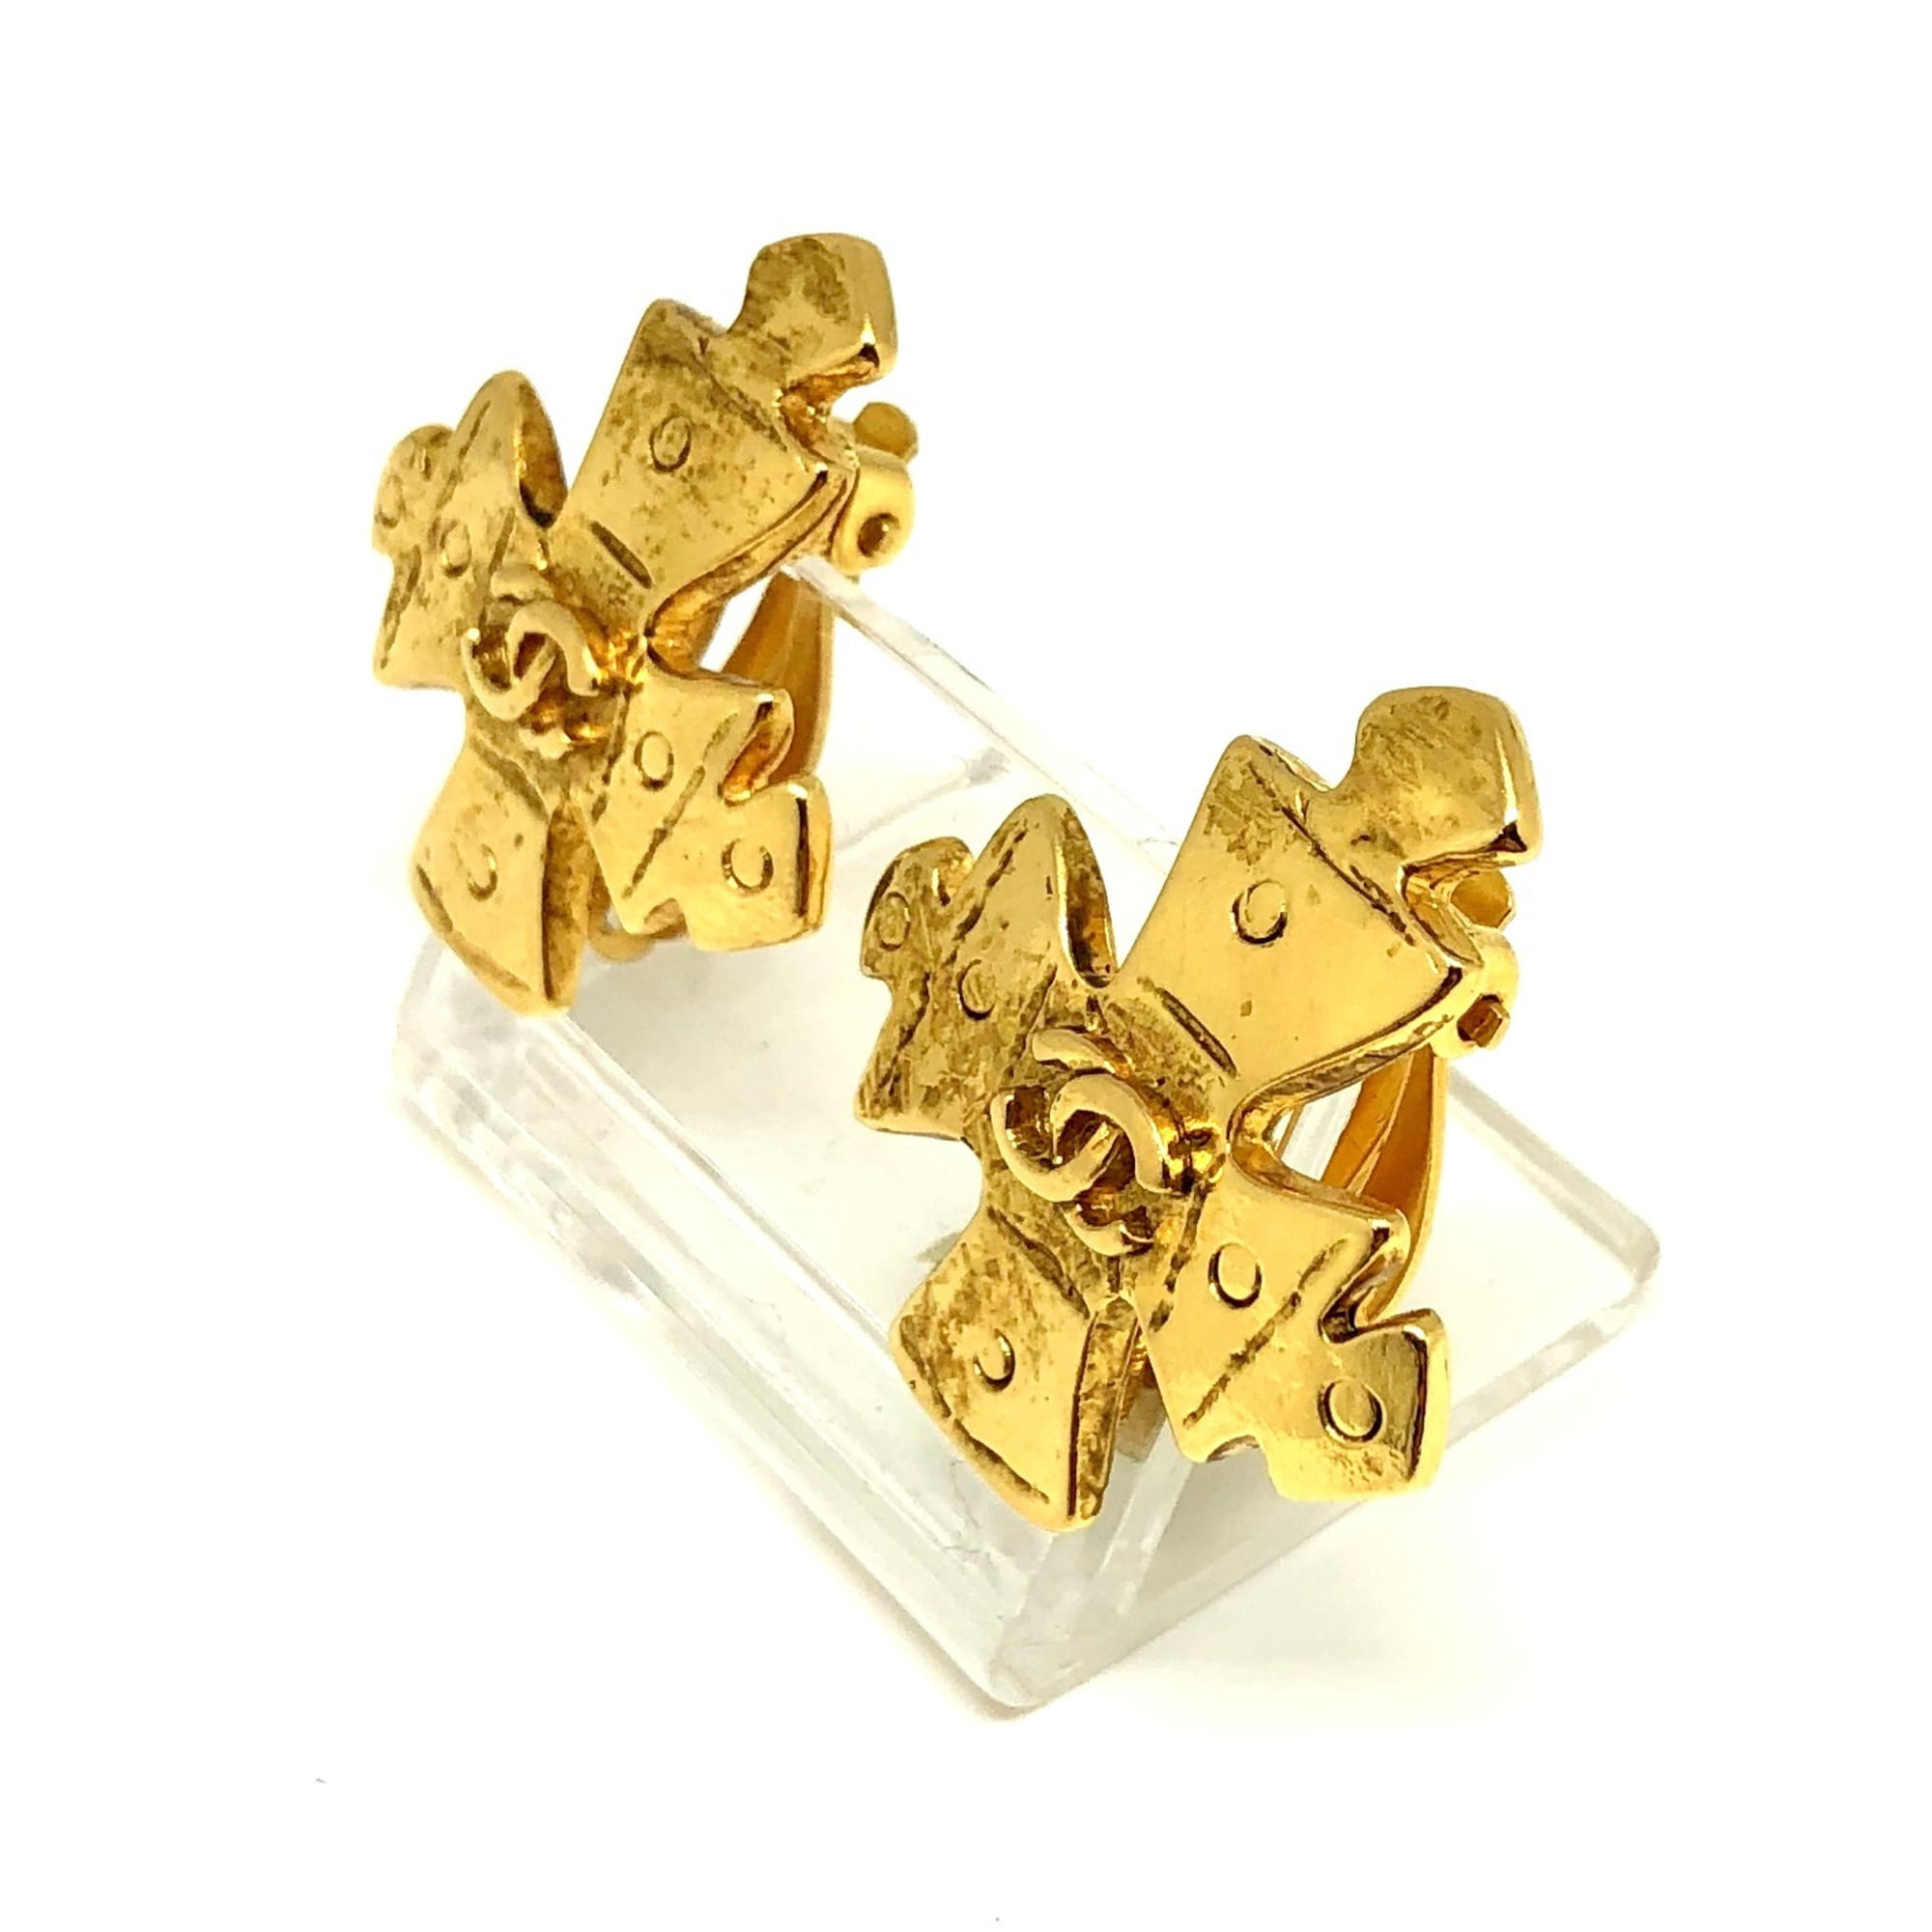 Chanel Chanel Earrings 94a Coco Mark Gold Women's Accessories Auction